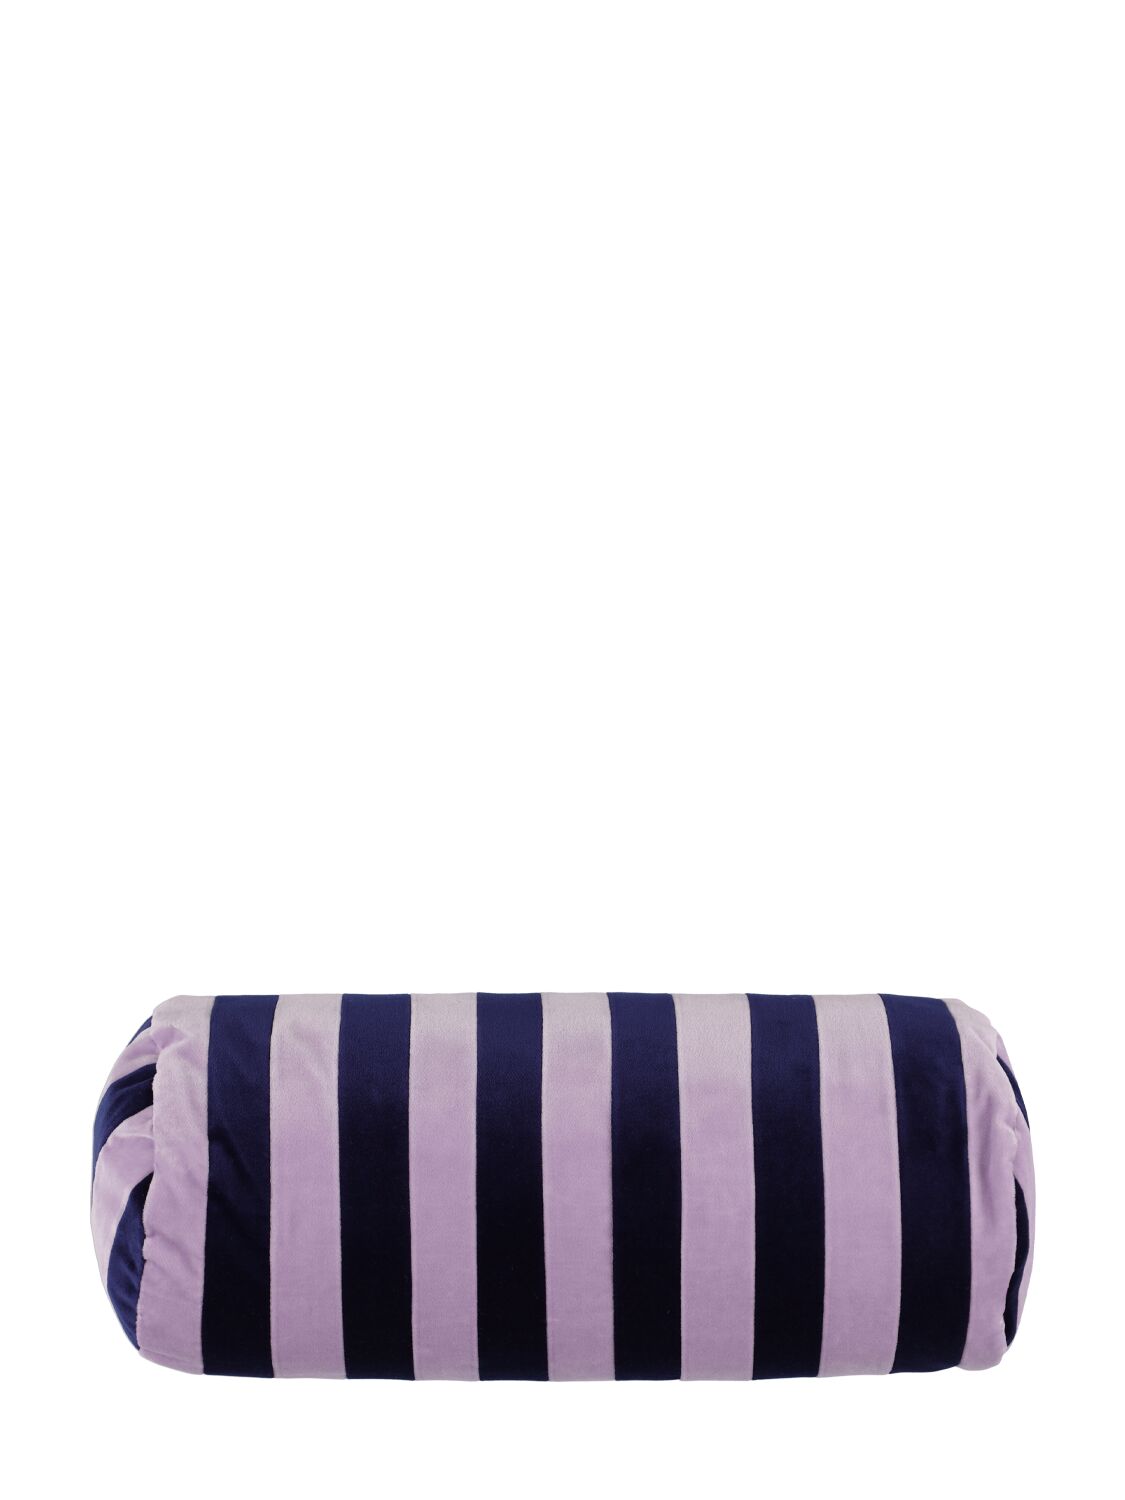 Christina Lundsteen Striped Bolster Cushion In Multi